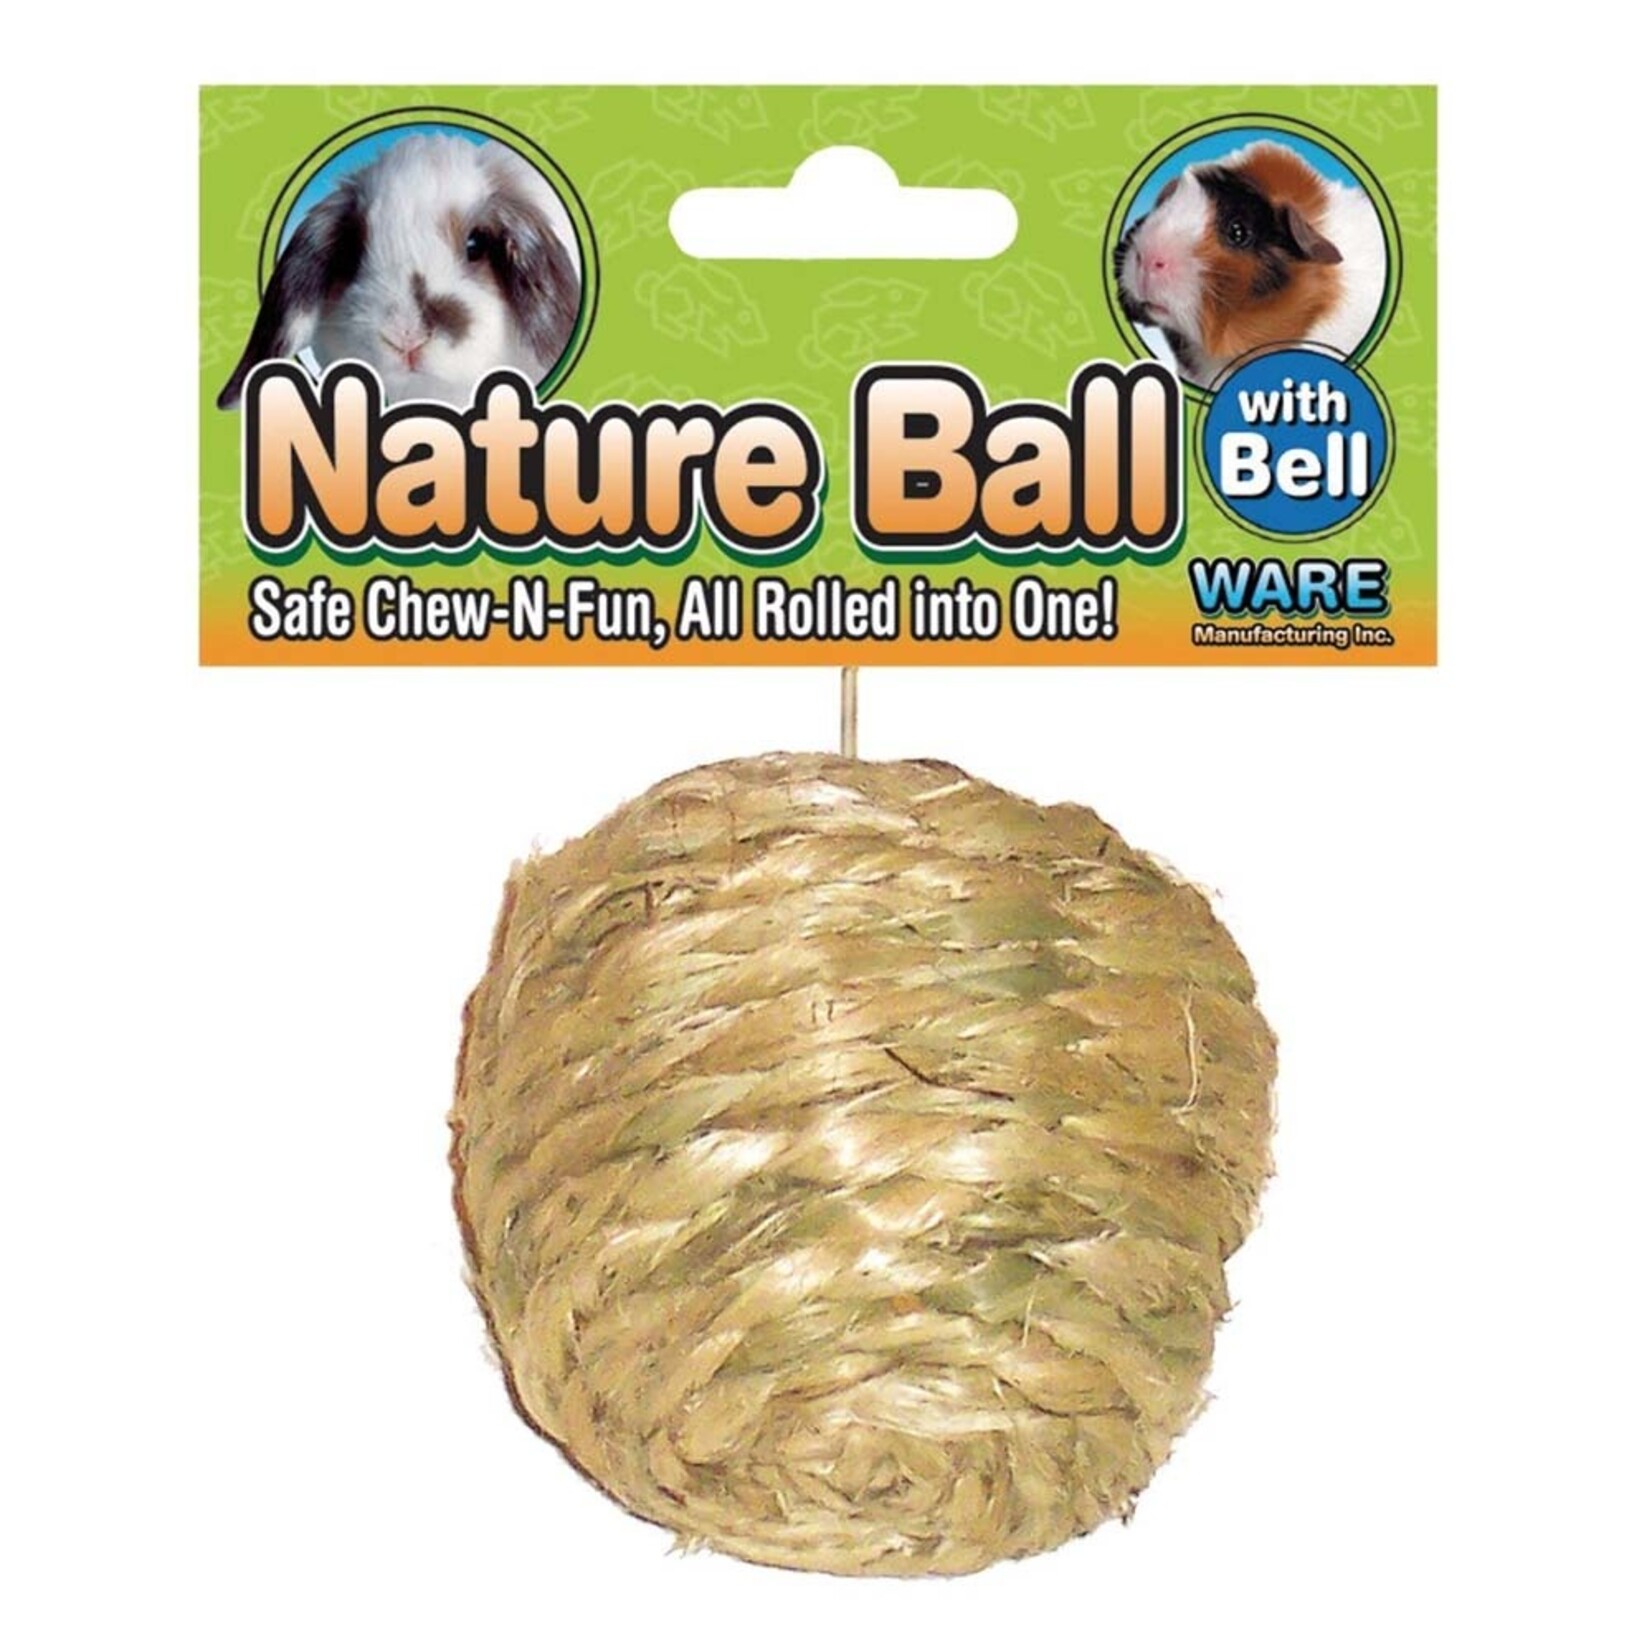 WARE MANUFACTURING Nature Ball+Bell 4in